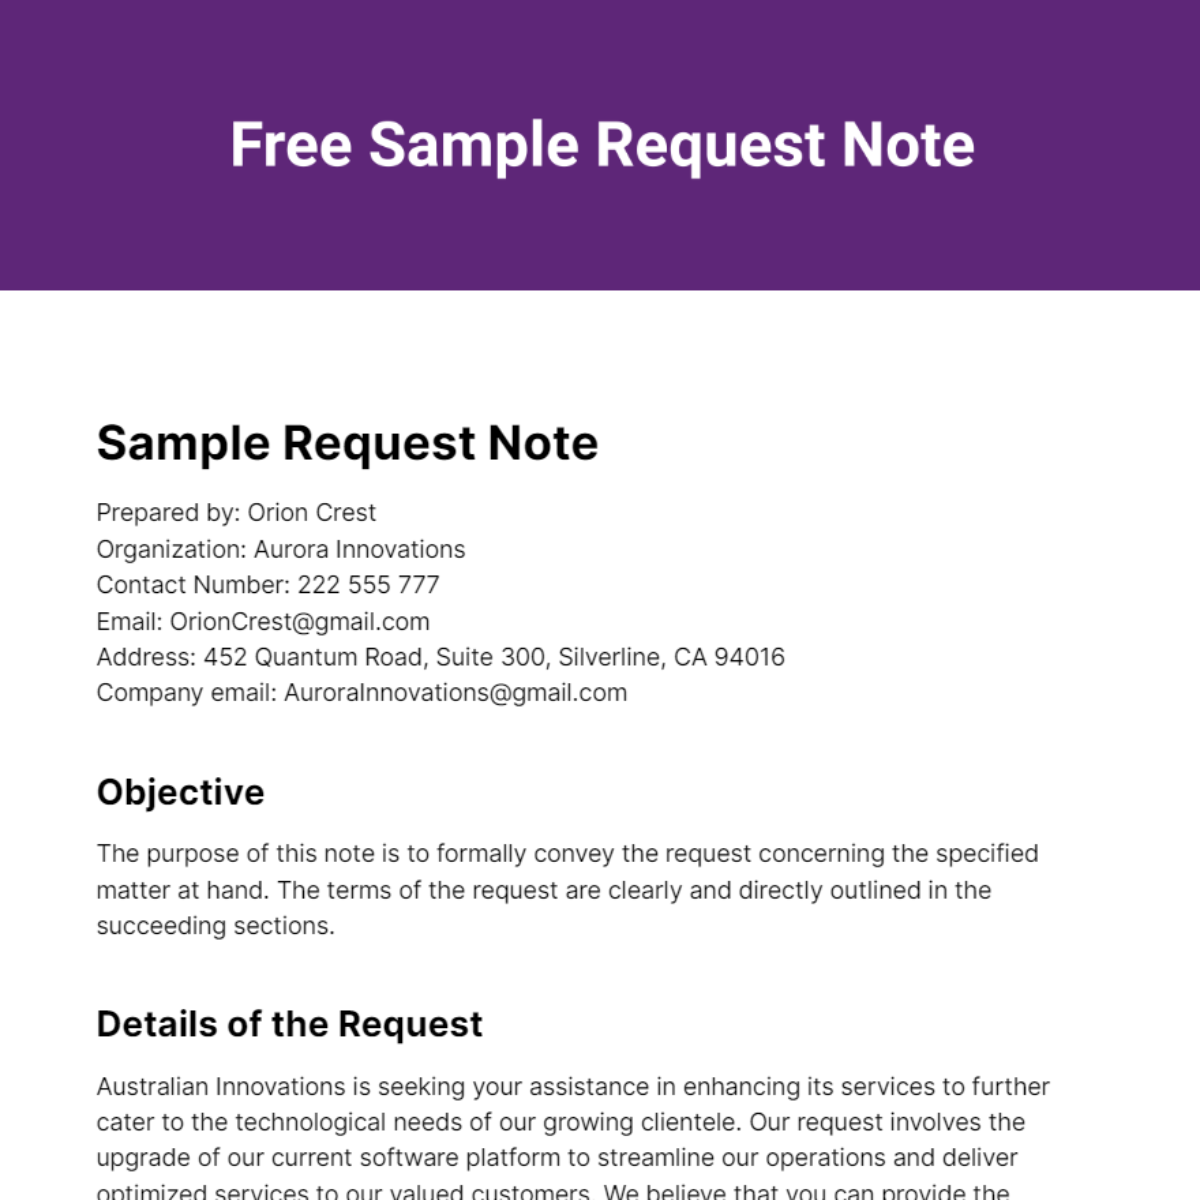 Sample Request Note Template